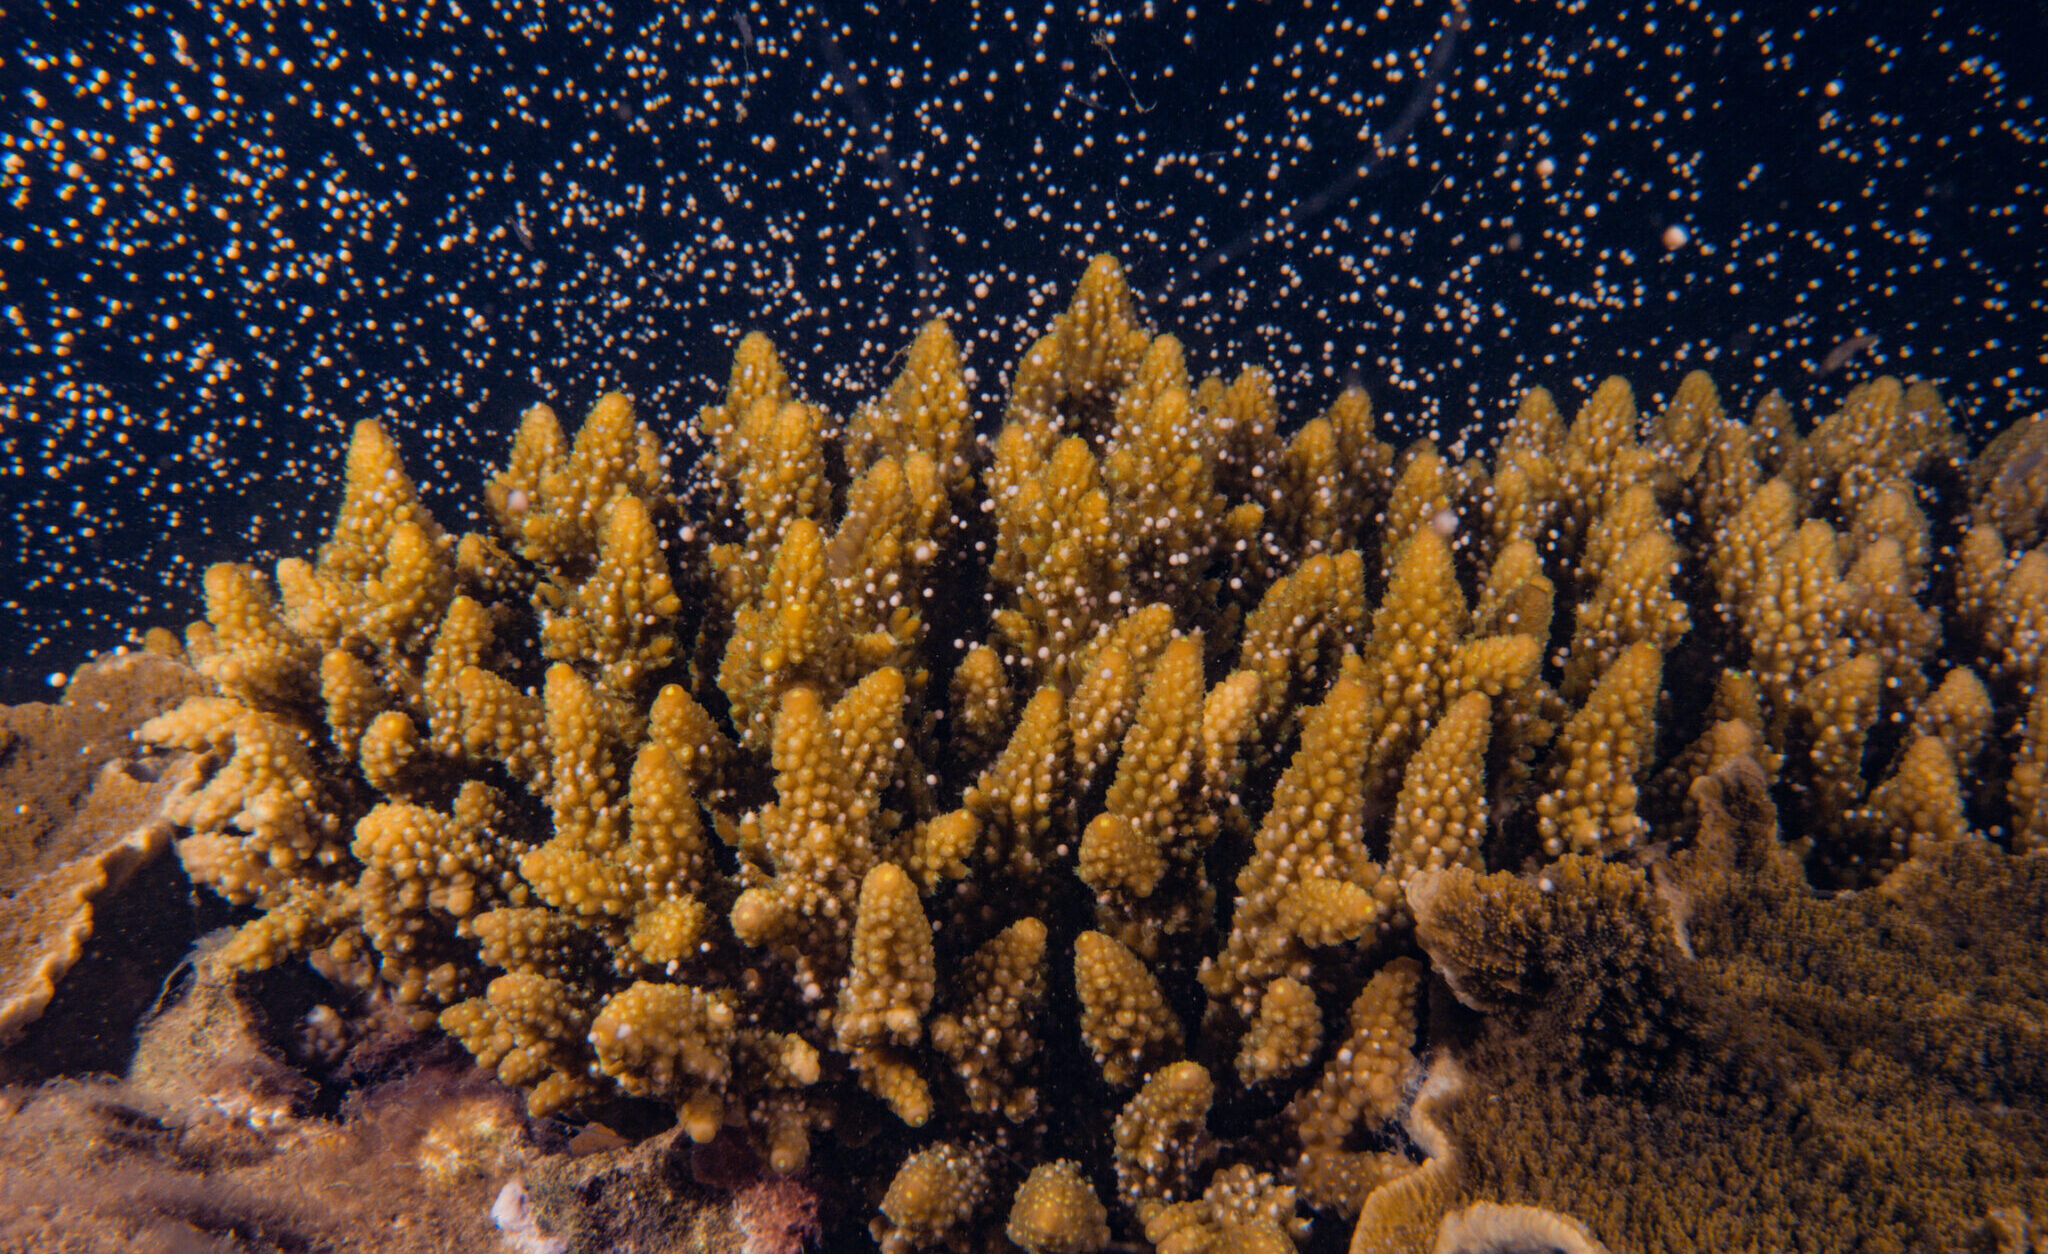 The annual mass coral spawning event - a natural marvel and a top reason to scuba dive in the Great Barrier Reef